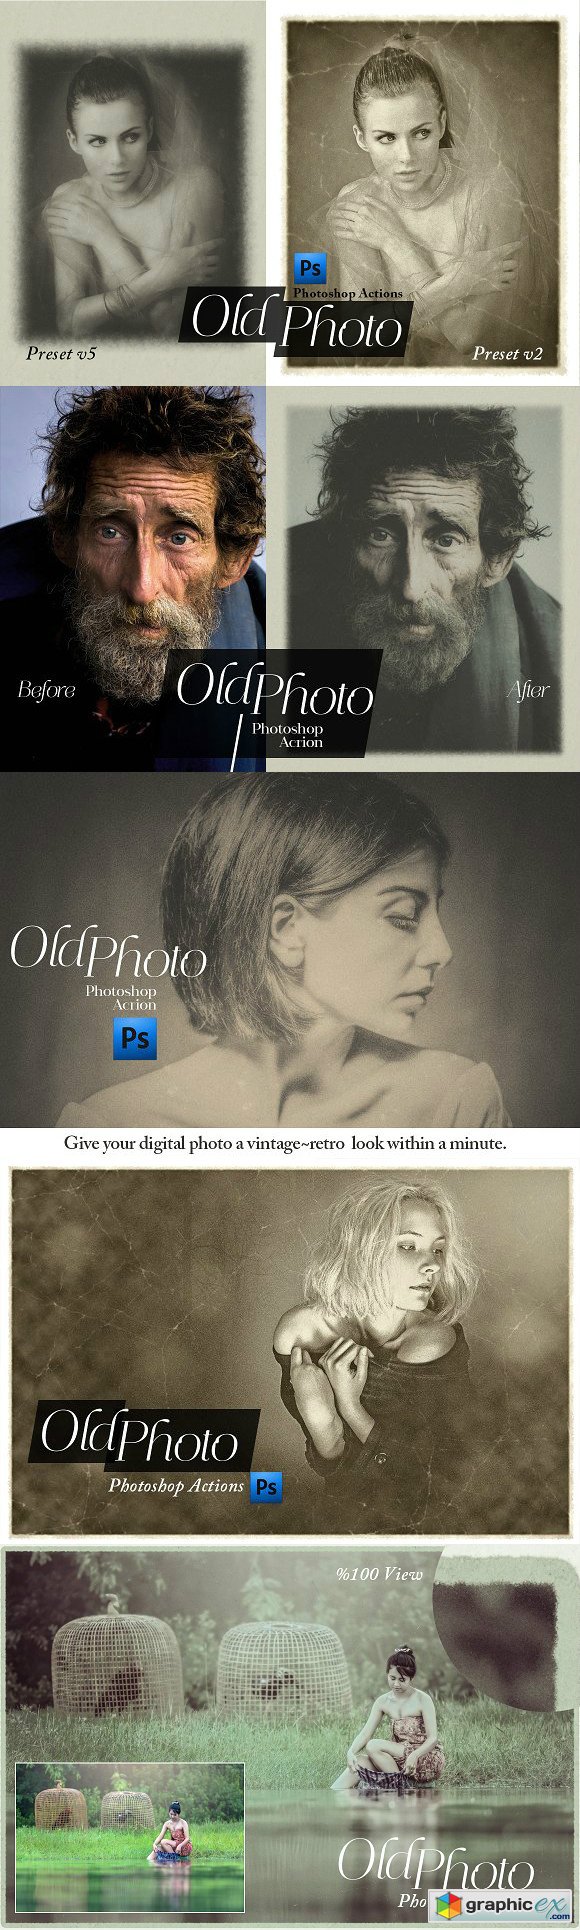 Old Photo Photoshop Actions